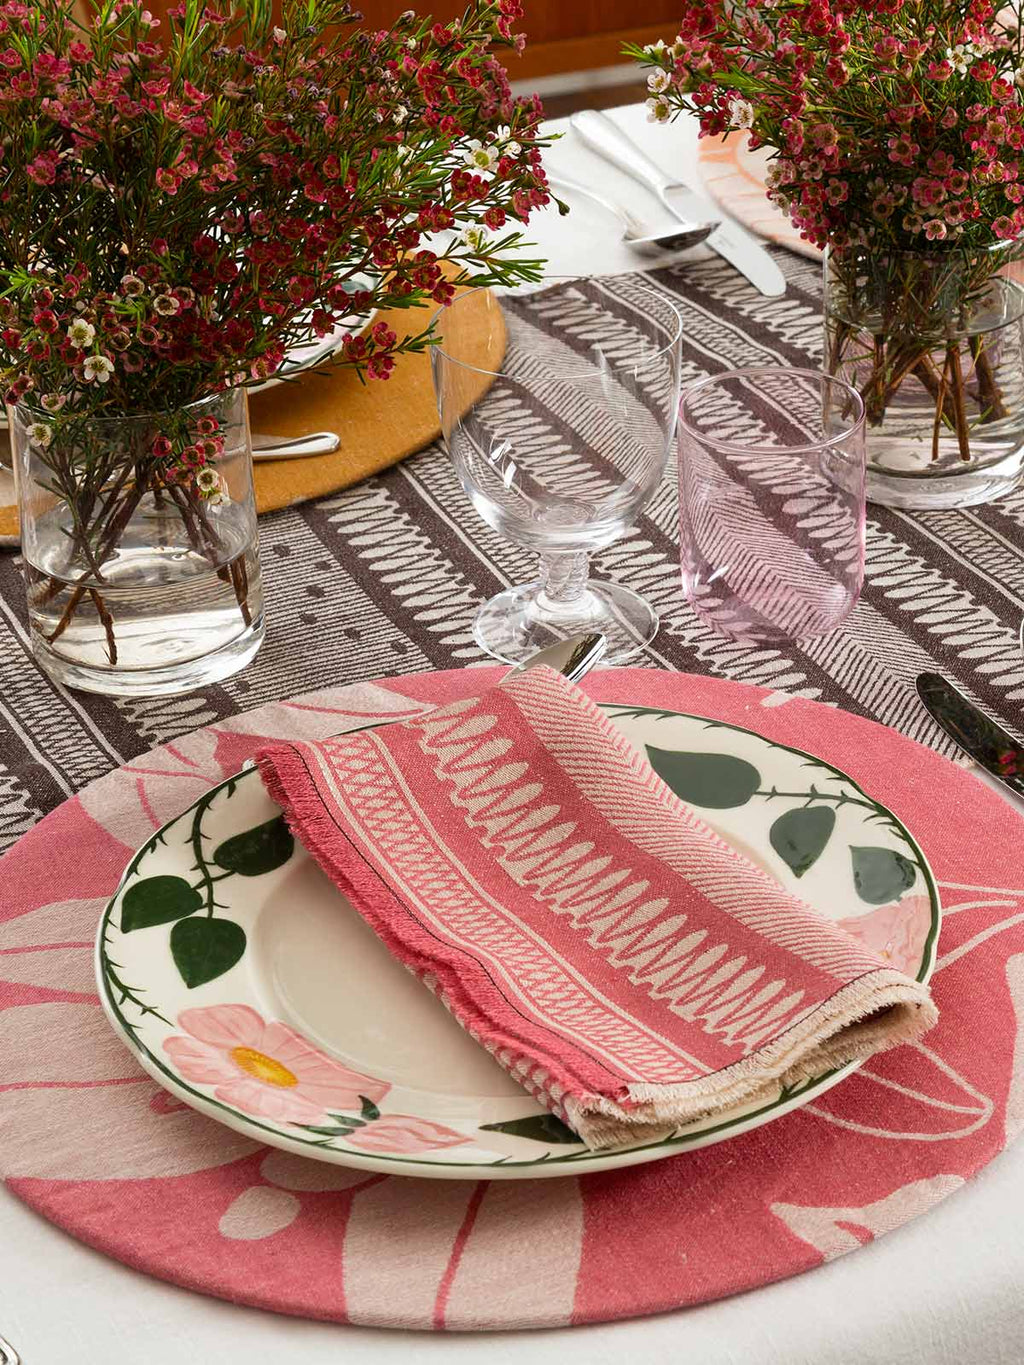 Linen Damask Tutti Le Foglie Charger Plate | Pink